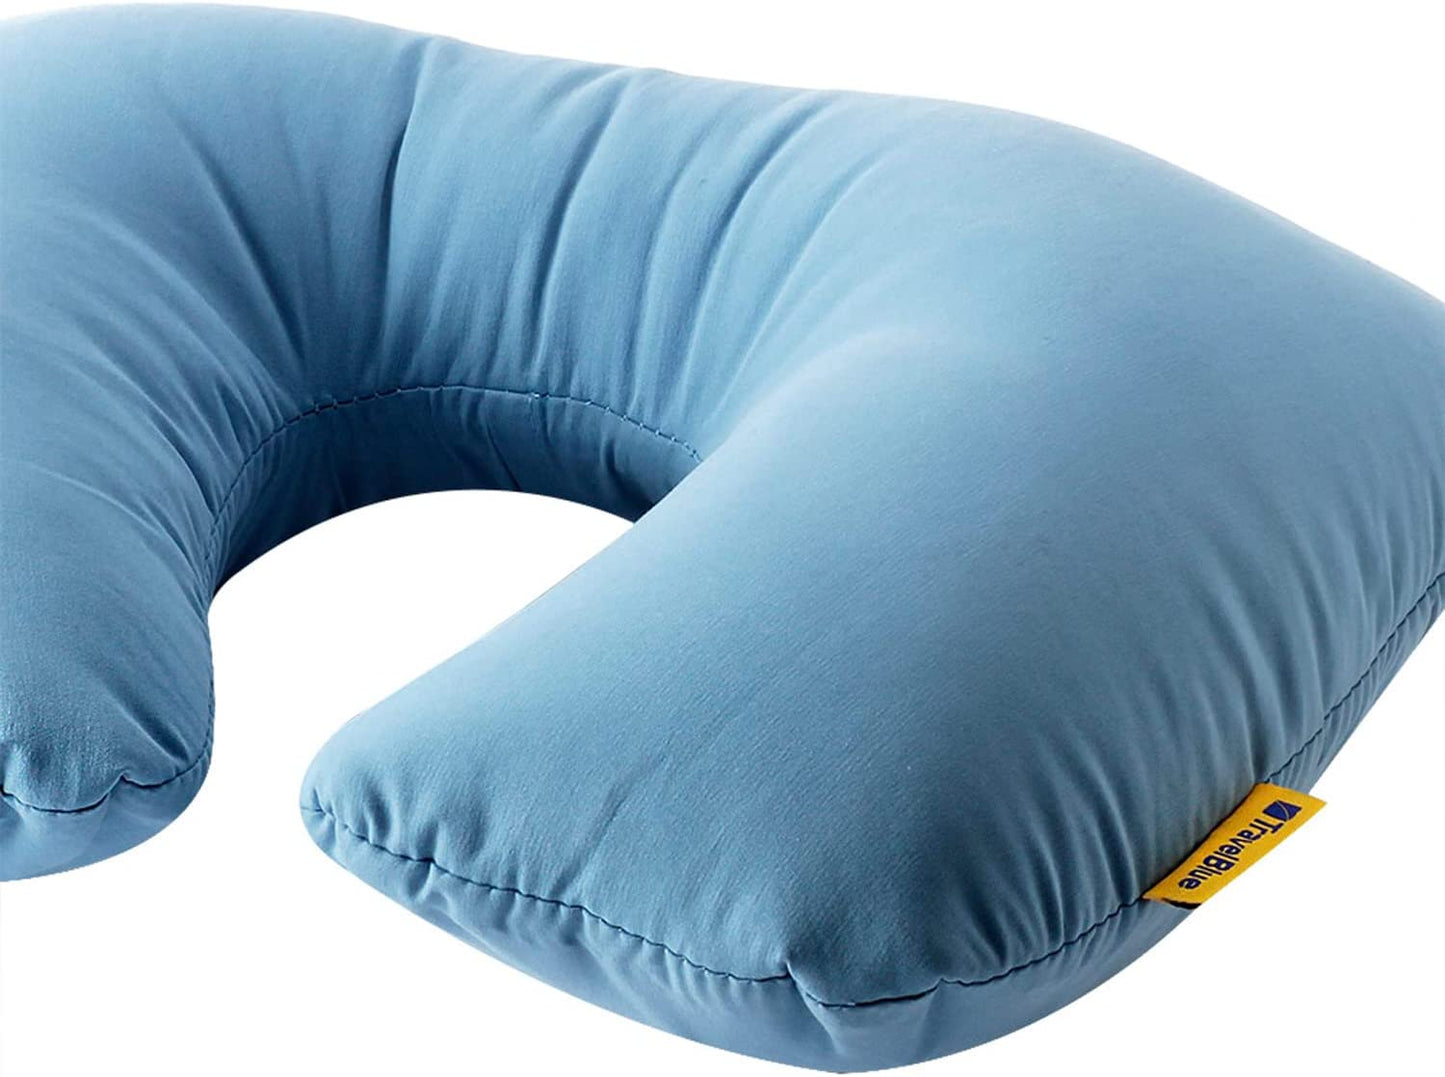 Travel Blue Ultimate Pillow, Indgo, One Size, Travel Pillow